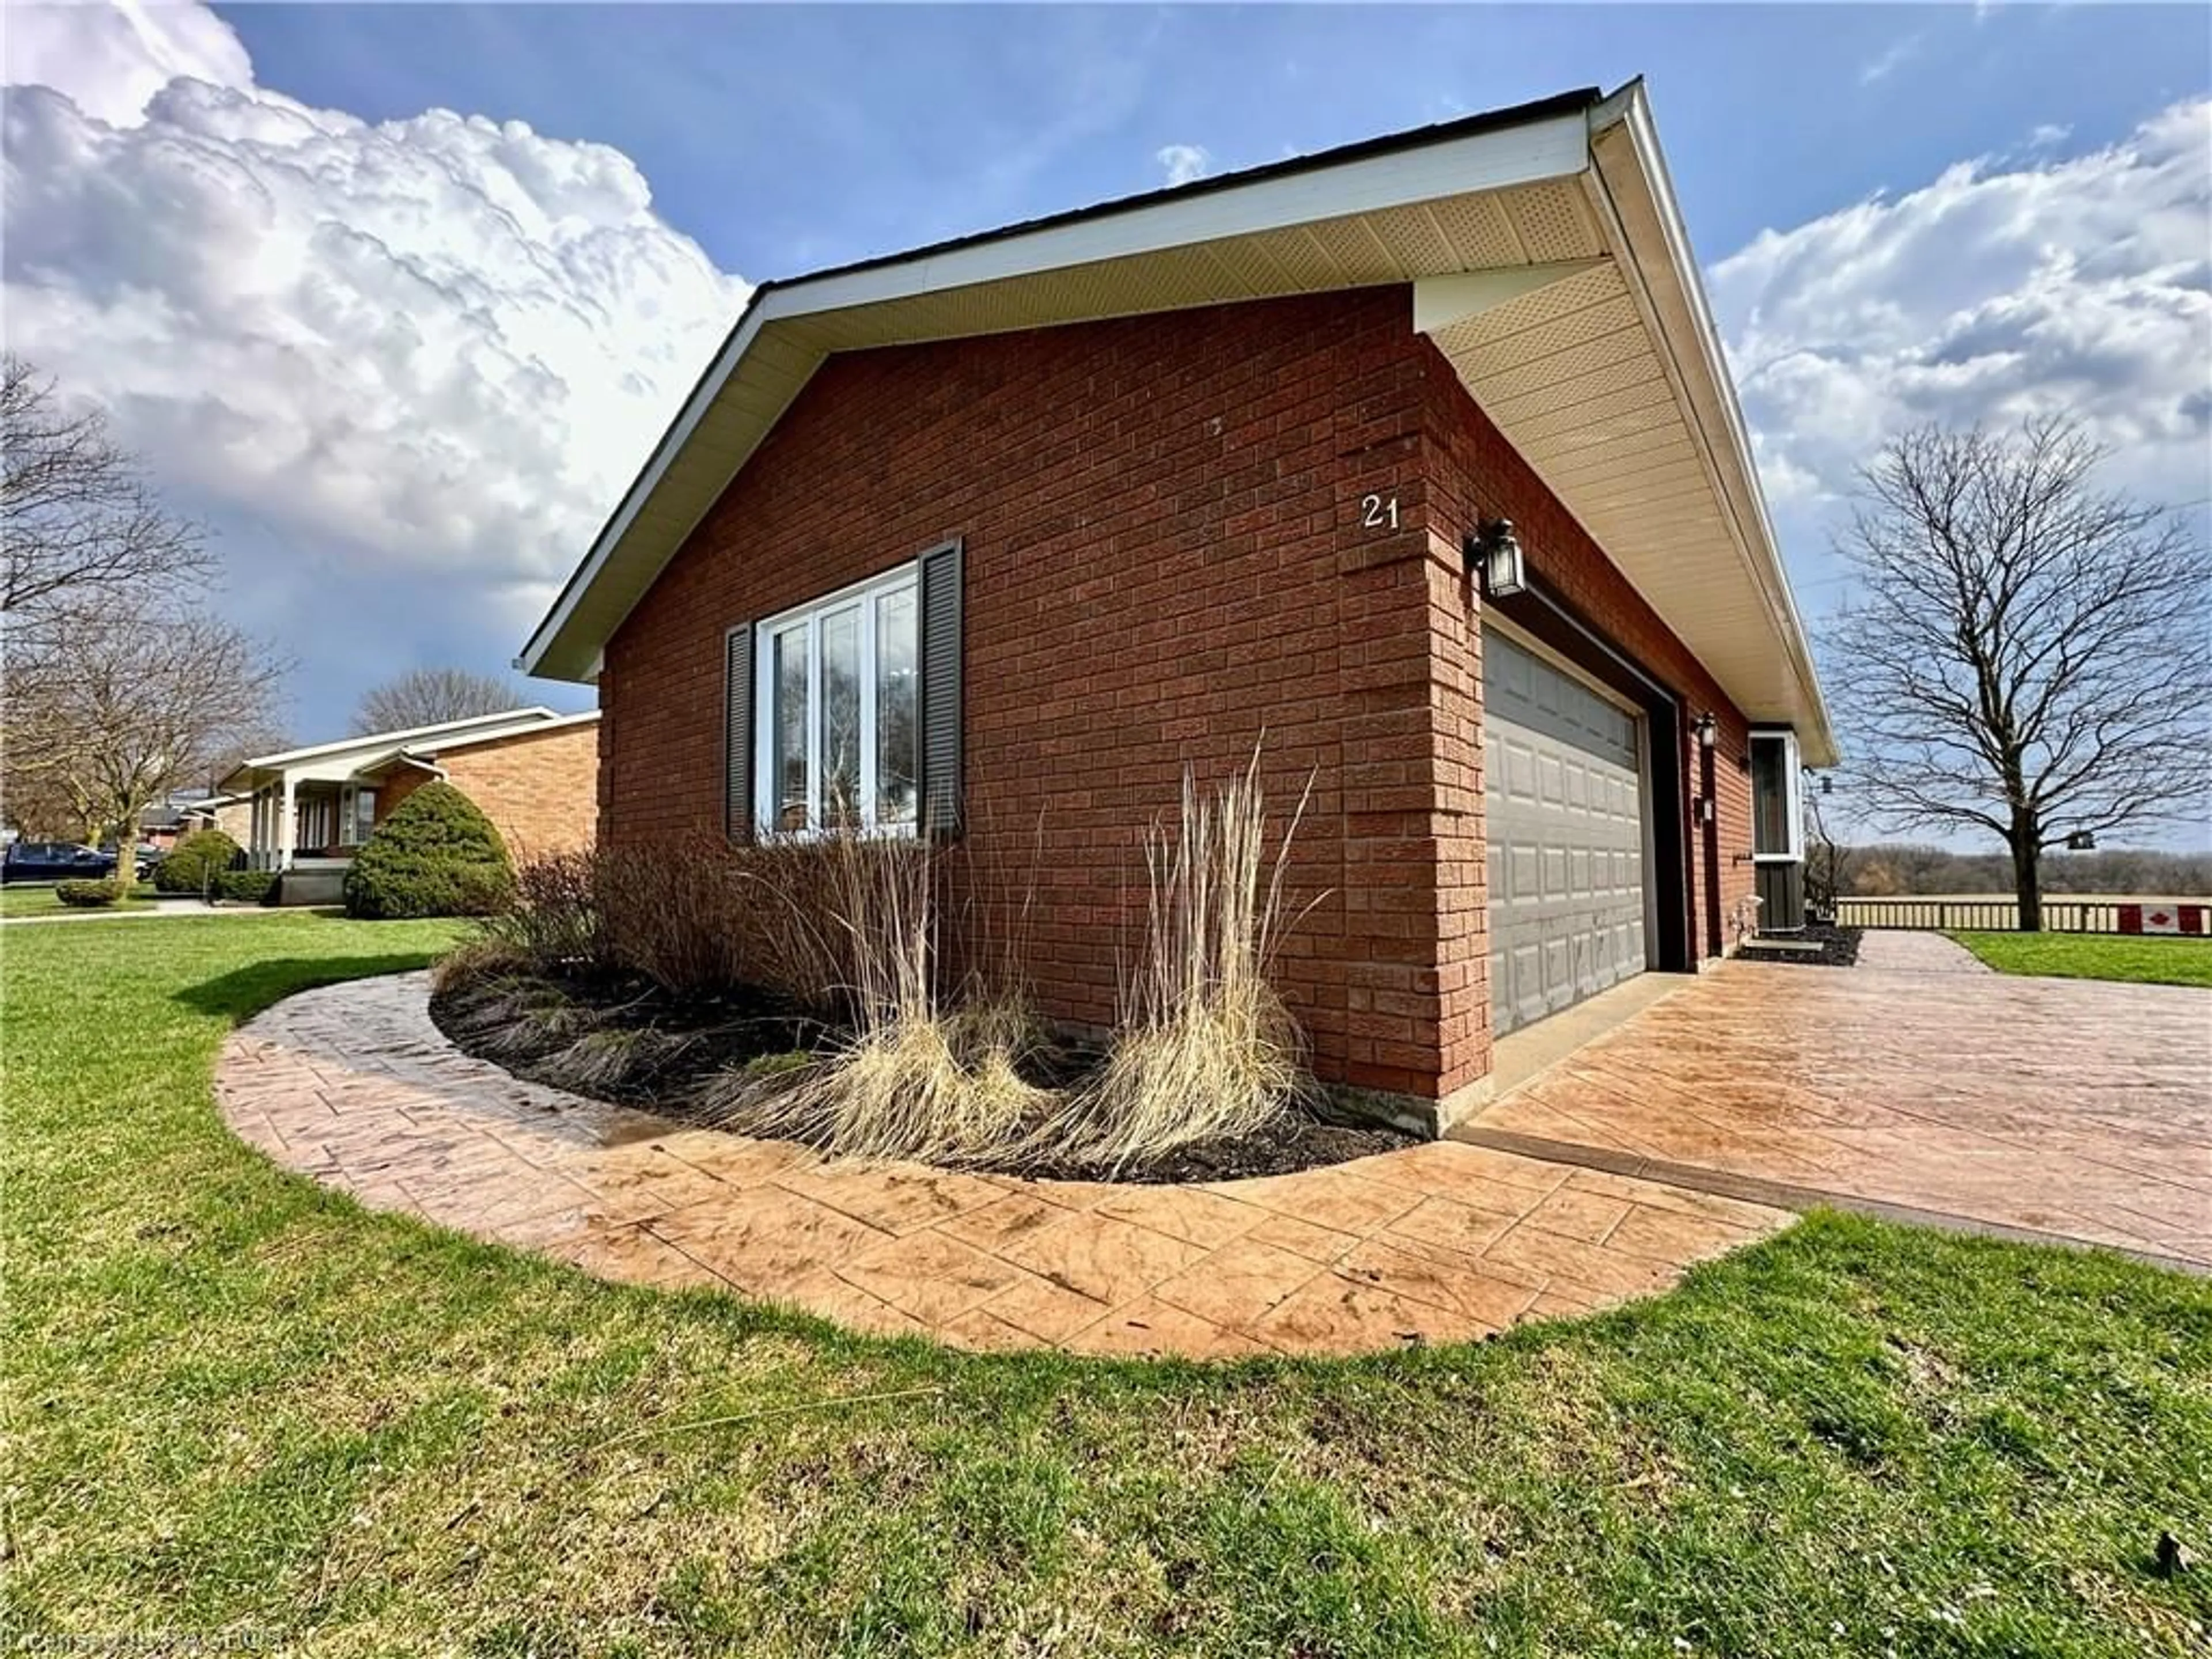 Home with brick exterior material for 21 2nd Street Cres, Hanover Ontario N4N 3R2